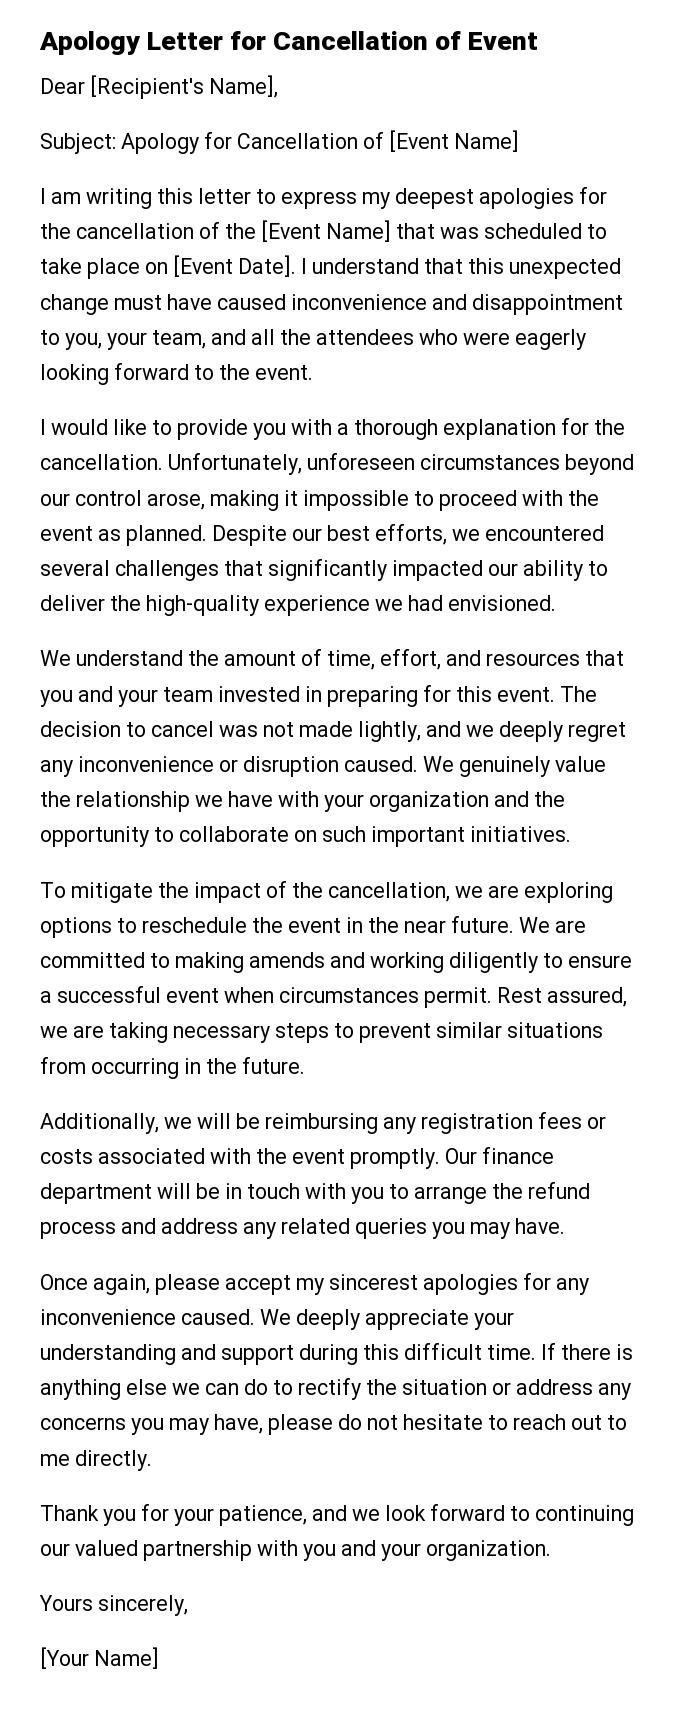 Apology Letter for Cancellation of Event